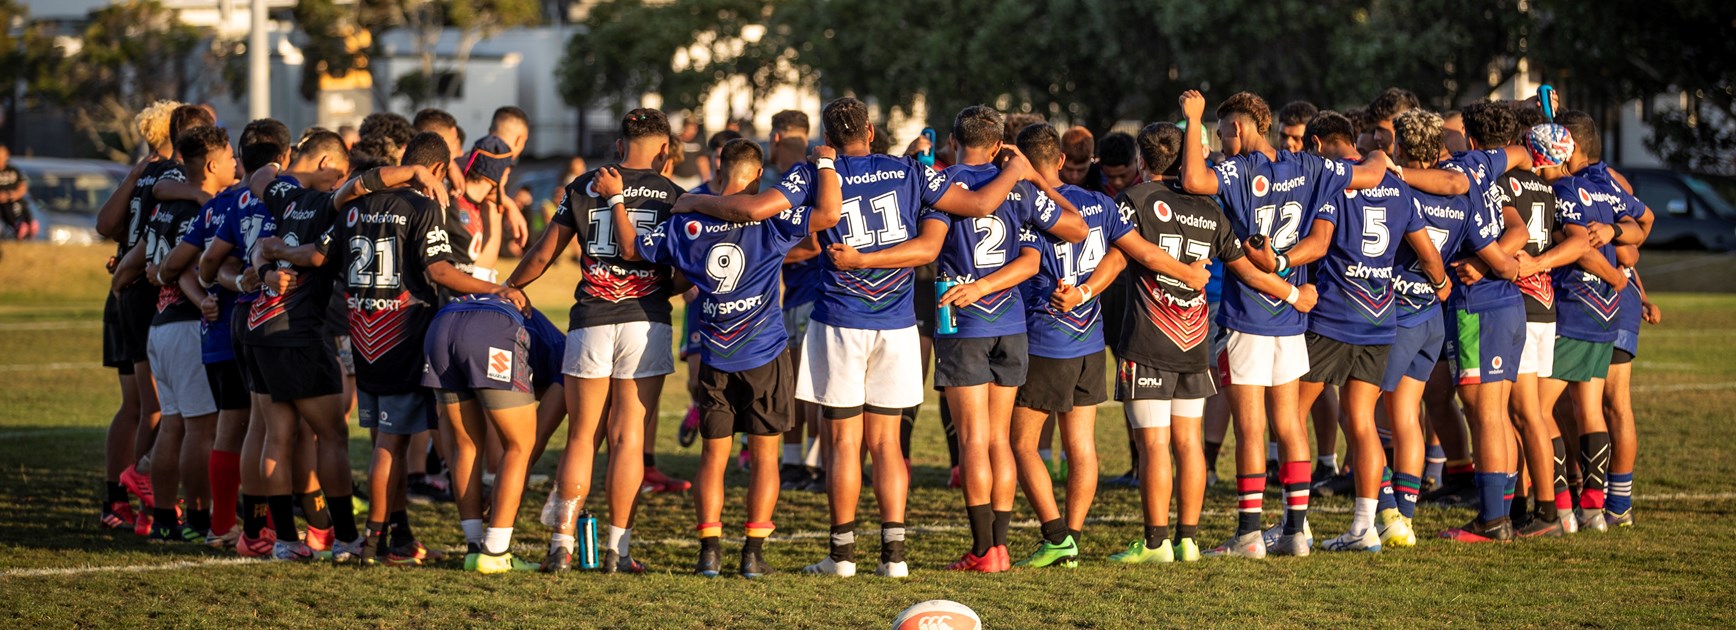 Vodafone Warriors supporting new youth competitions